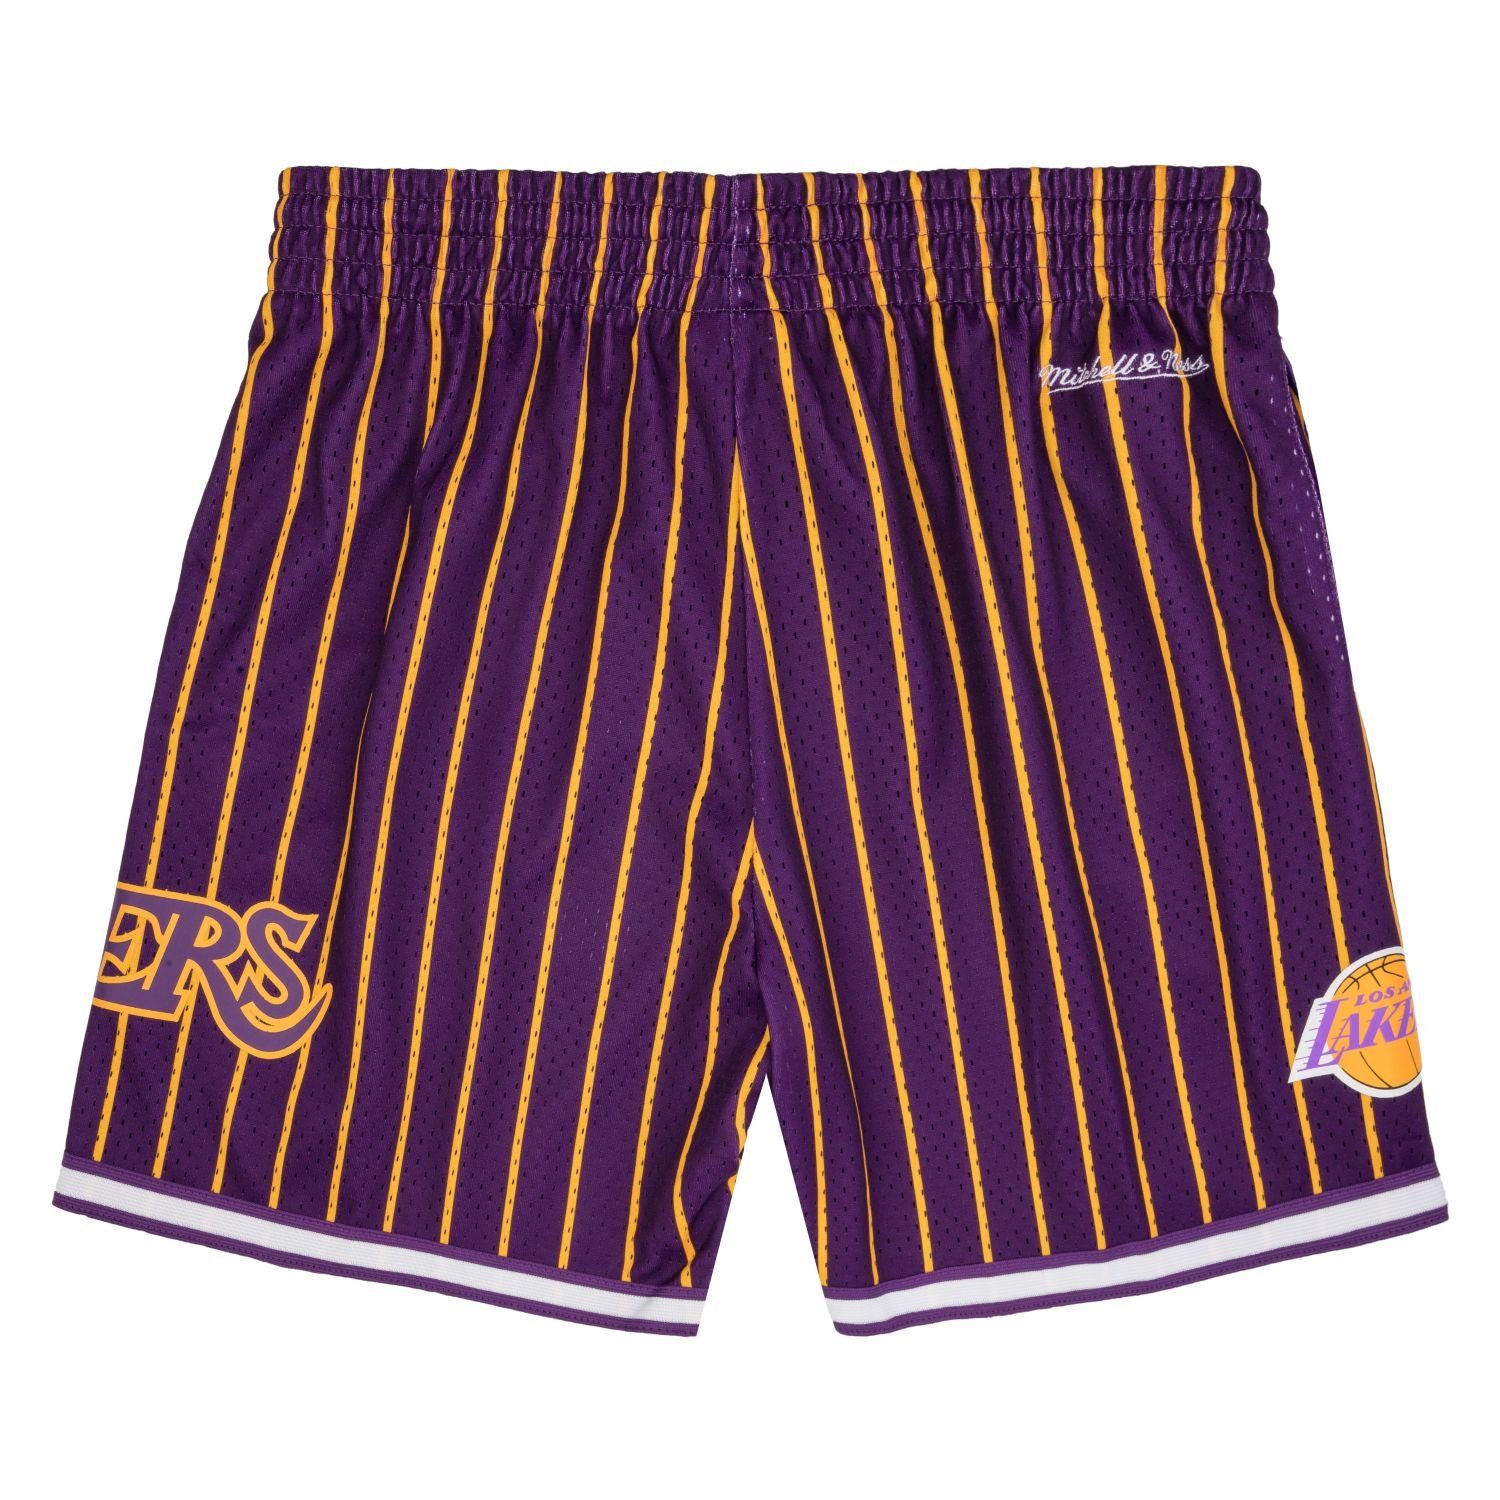 Ness & Los Shorts Lakers Angeles City Collection Mitchell